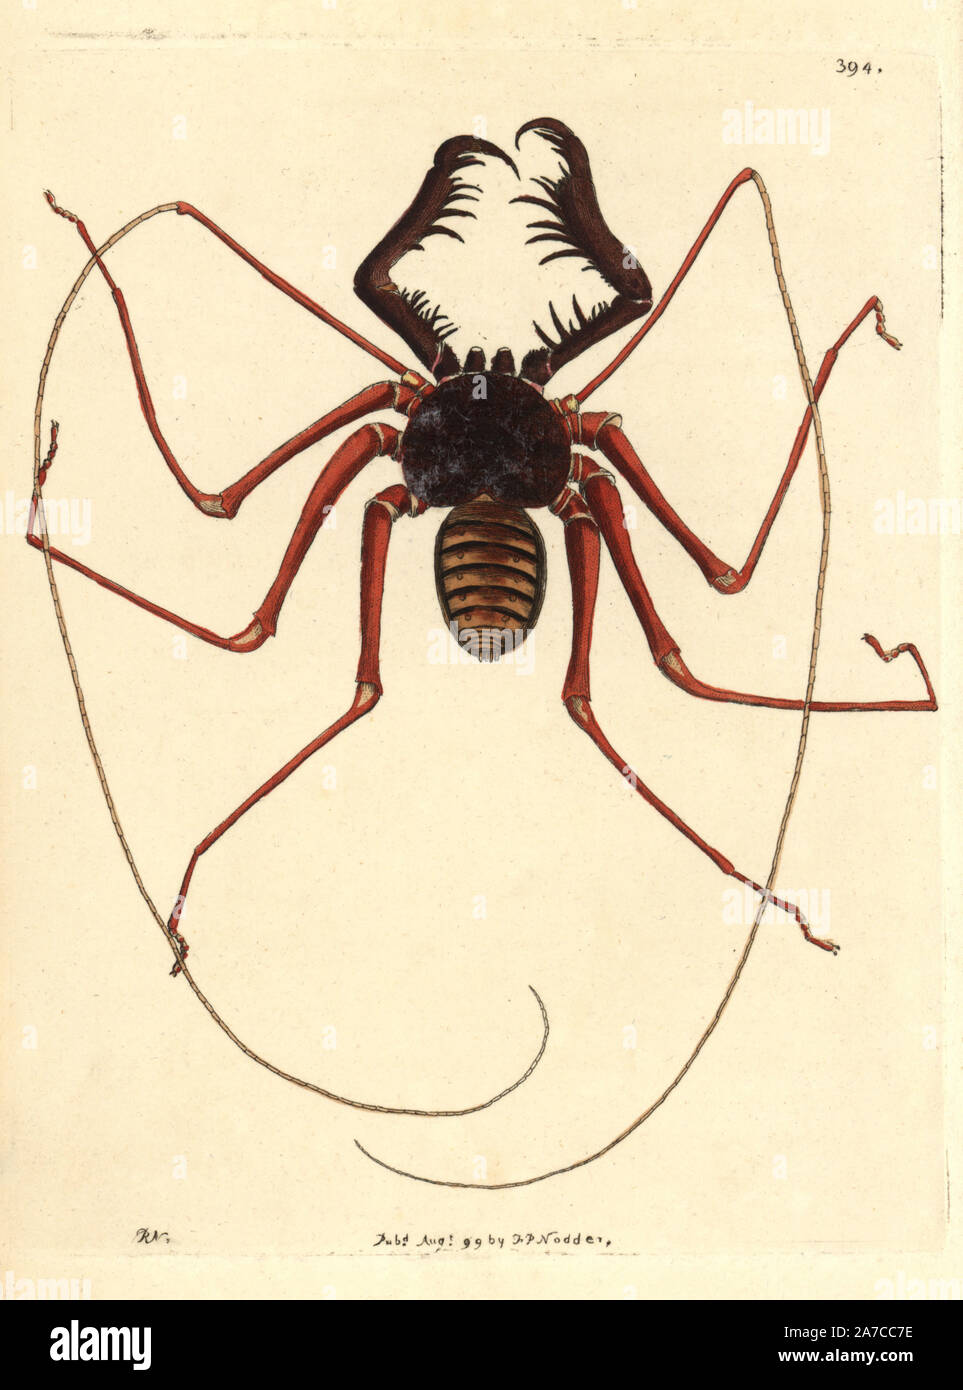 Phrynus ceylonicus, an amblypygid or whip spider from Sri Lanka. Illustration drawn and engraved by Richard Polydore Nodder. Handcolored copperplate engraving from George Shaw and Frederick Nodder's 'The Naturalist's Miscellany,' London, 1799. Most of the 1,064 illustrations of animals, birds, insects, crustaceans, fishes, marine life and microscopic creatures were drawn by George Shaw, Frederick Nodder and Richard Nodder, and engraved and published by the Nodder family. Frederick drew and engraved many of the copperplates until his death around 1800, and son Richard (17741823) was responsibl Stock Photo